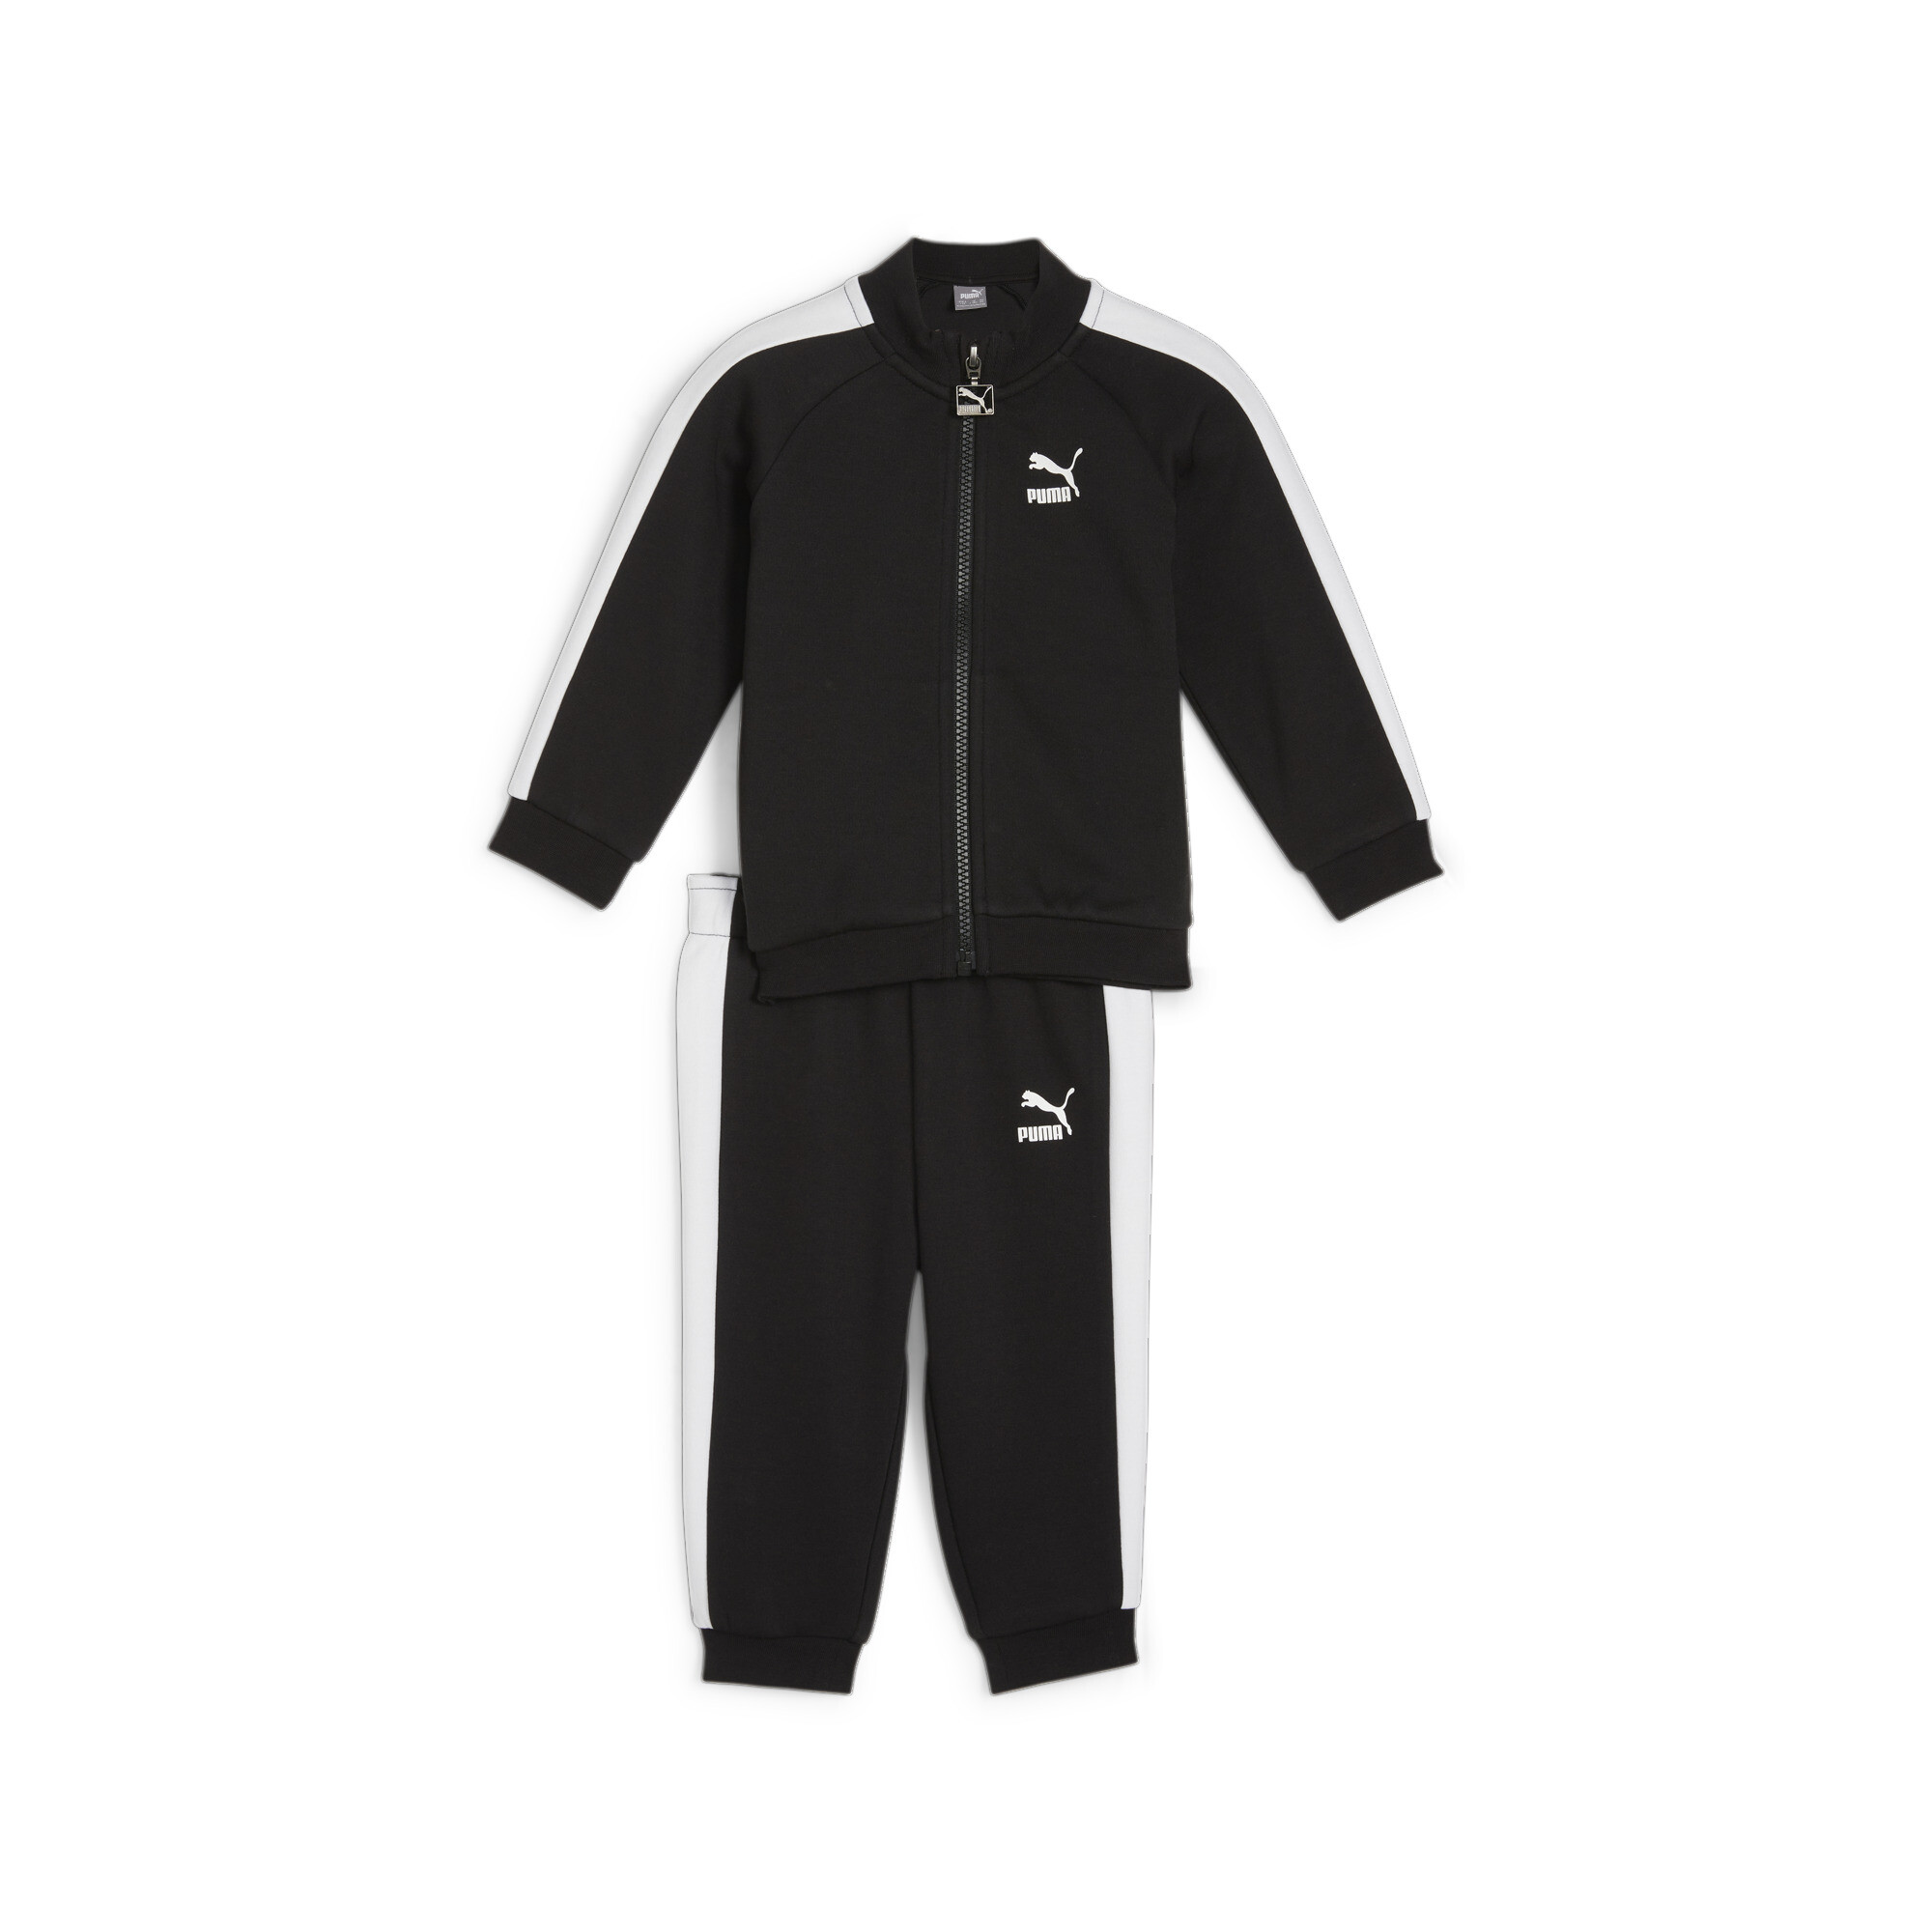 PUMA MINICATS T7 ICONIC Baby Tracksuit Set In 10 - Black, Size 1-2 Youth